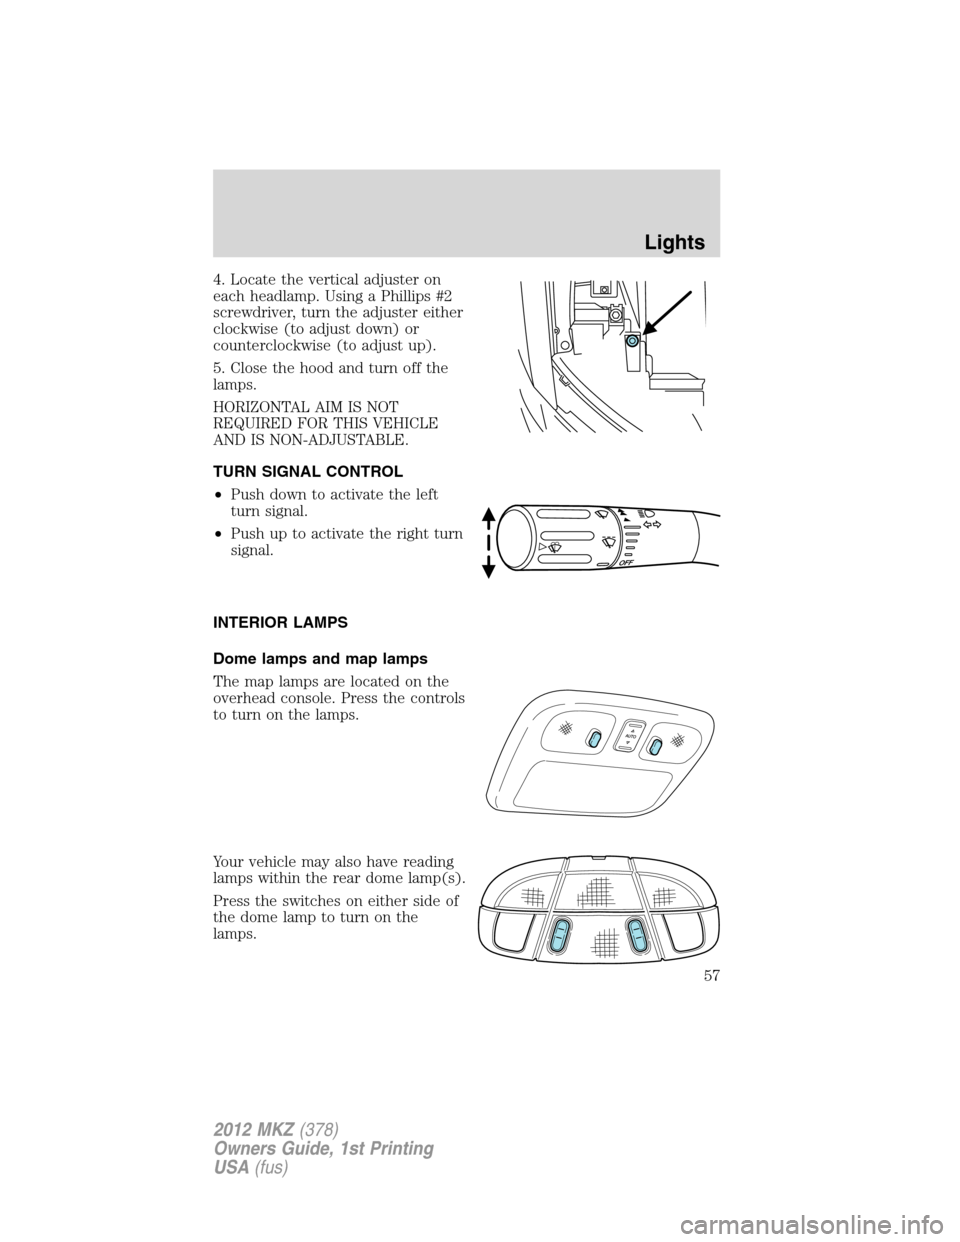 LINCOLN MKZ 2012  Owners Manual 4. Locate the vertical adjuster on
each headlamp. Using a Phillips #2
screwdriver, turn the adjuster either
clockwise (to adjust down) or
counterclockwise (to adjust up).
5. Close the hood and turn of